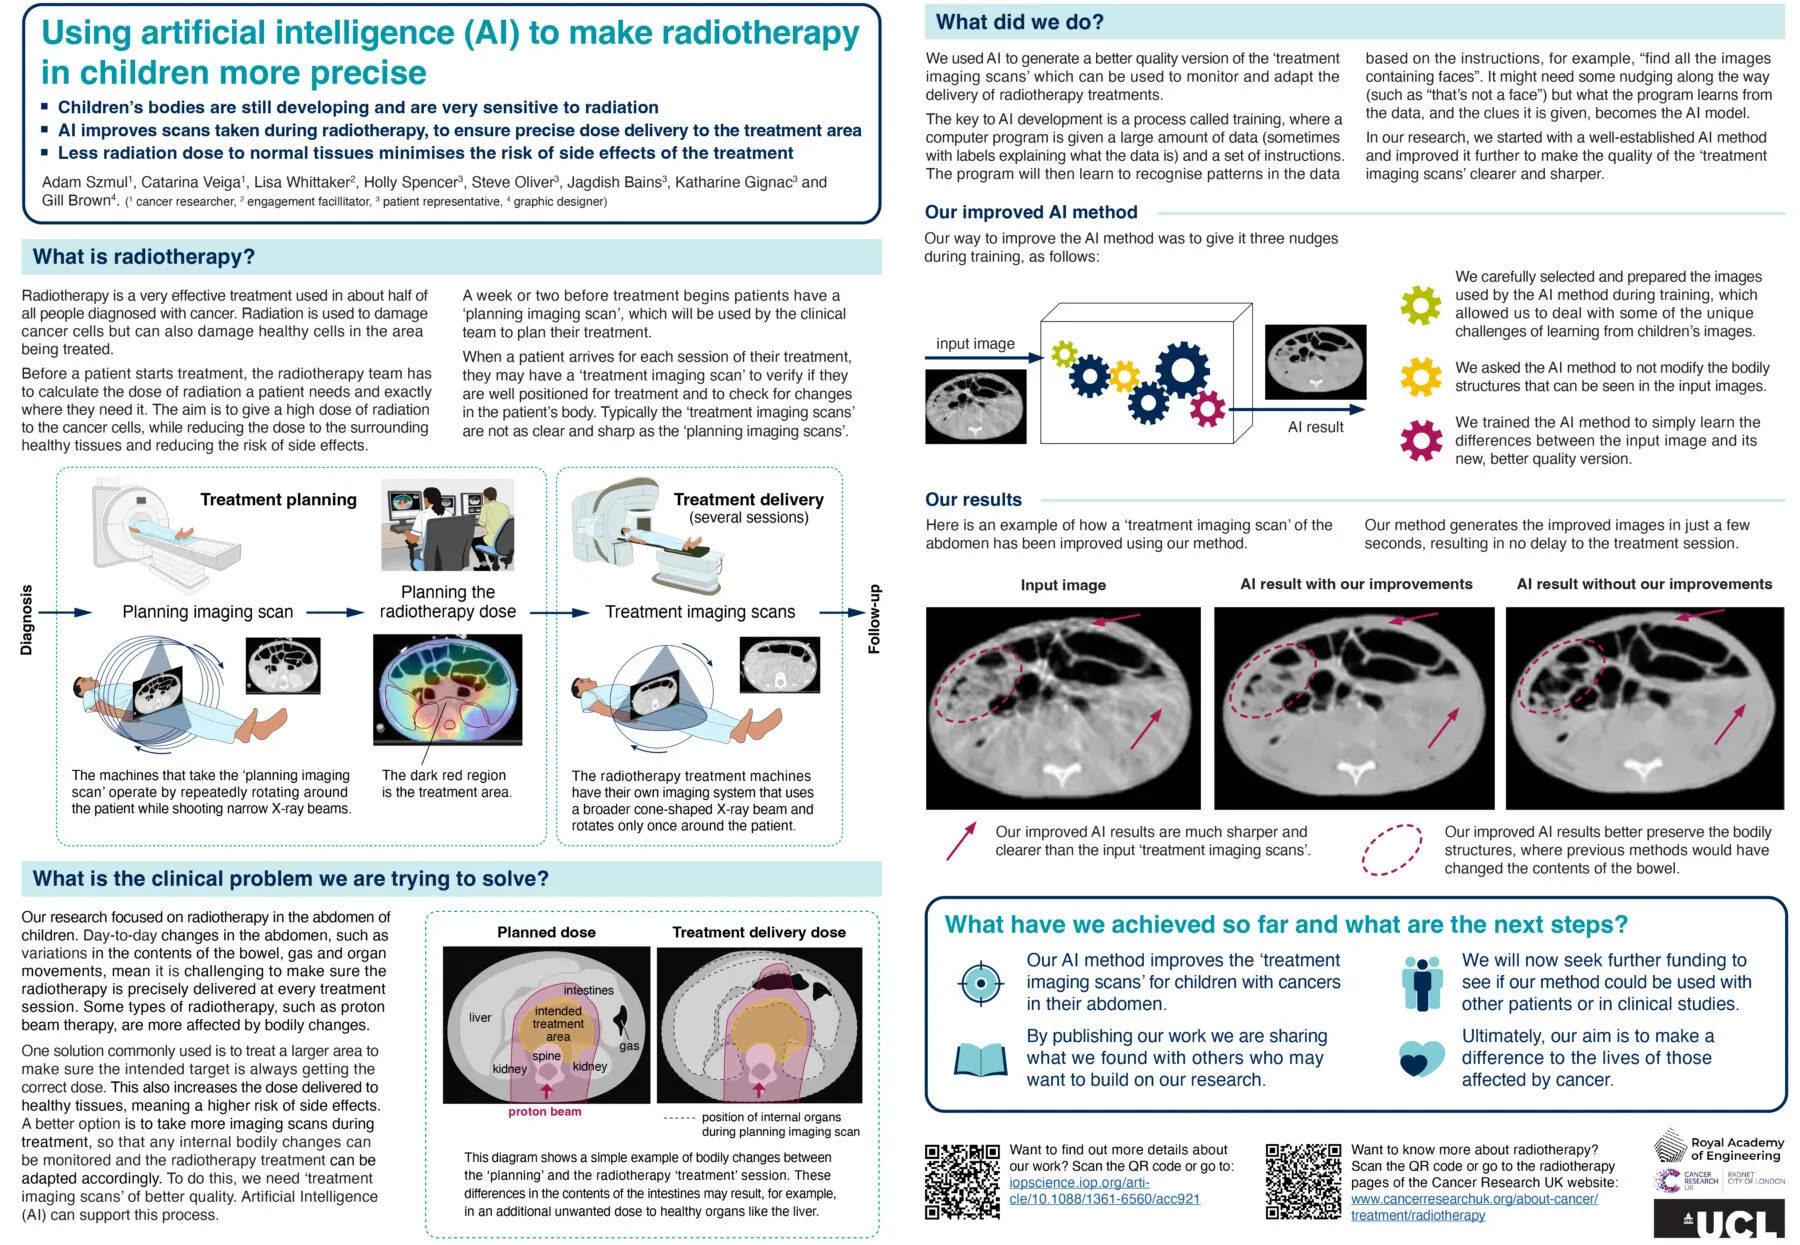 An informational sheet highlighting how radiotherapy can be used to make radiotherapy in children more precise